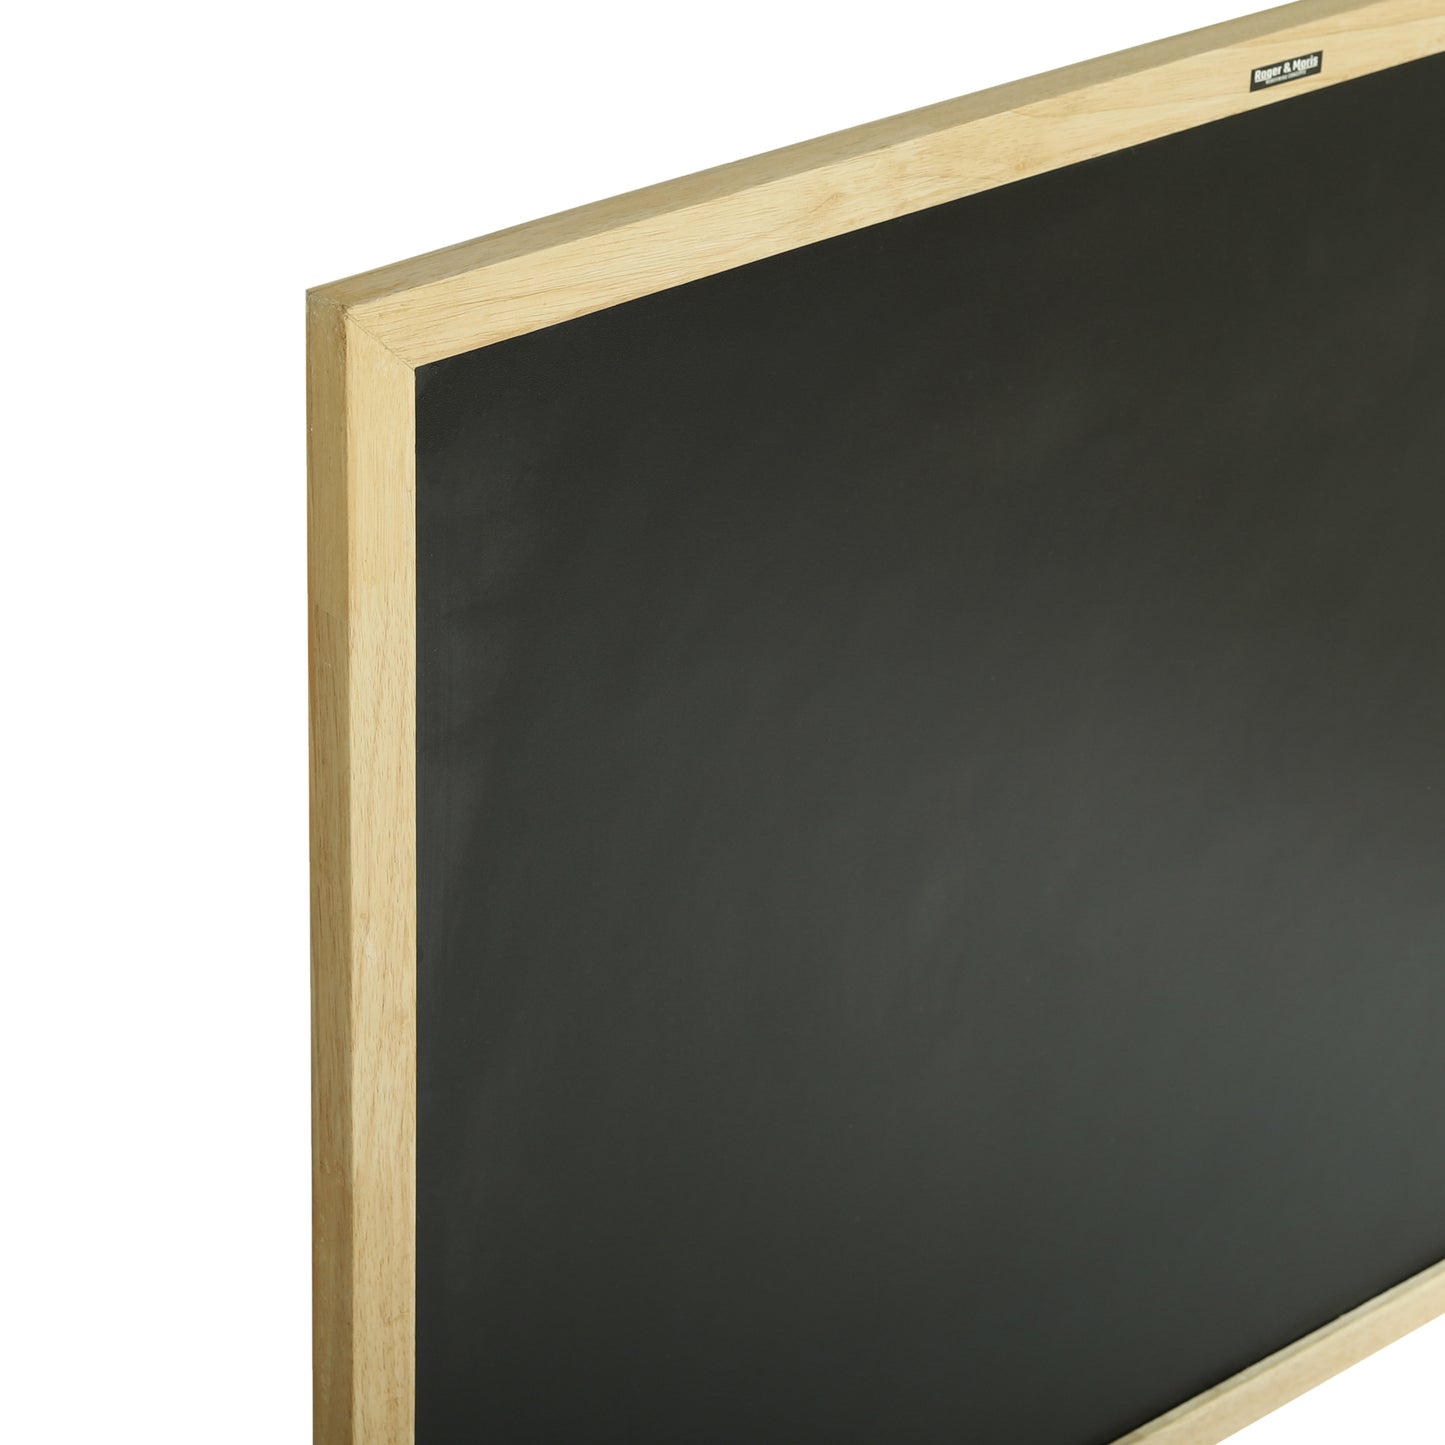 Roger & Moris Wooden (Rubber Wood) Framed Chalk Board - Non Magnetic, Lightweight for Home, Office and School (Black, Size : 2 feet x 1 foot)